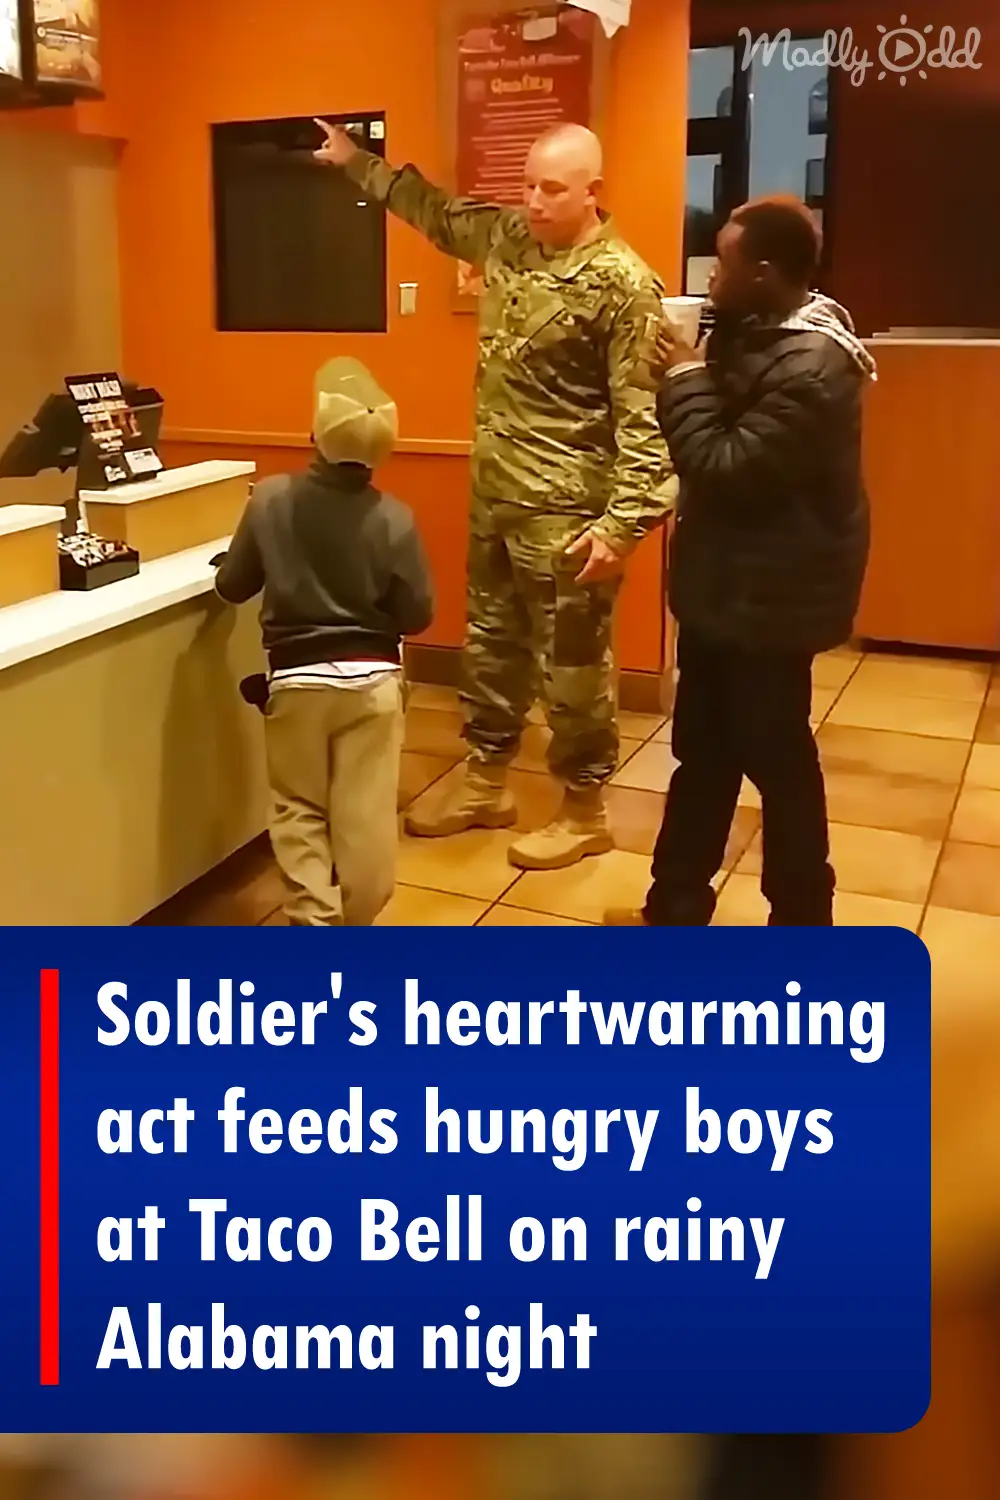 Soldier's heartwarming act feeds hungry boys at Taco Bell on rainy Alabama night